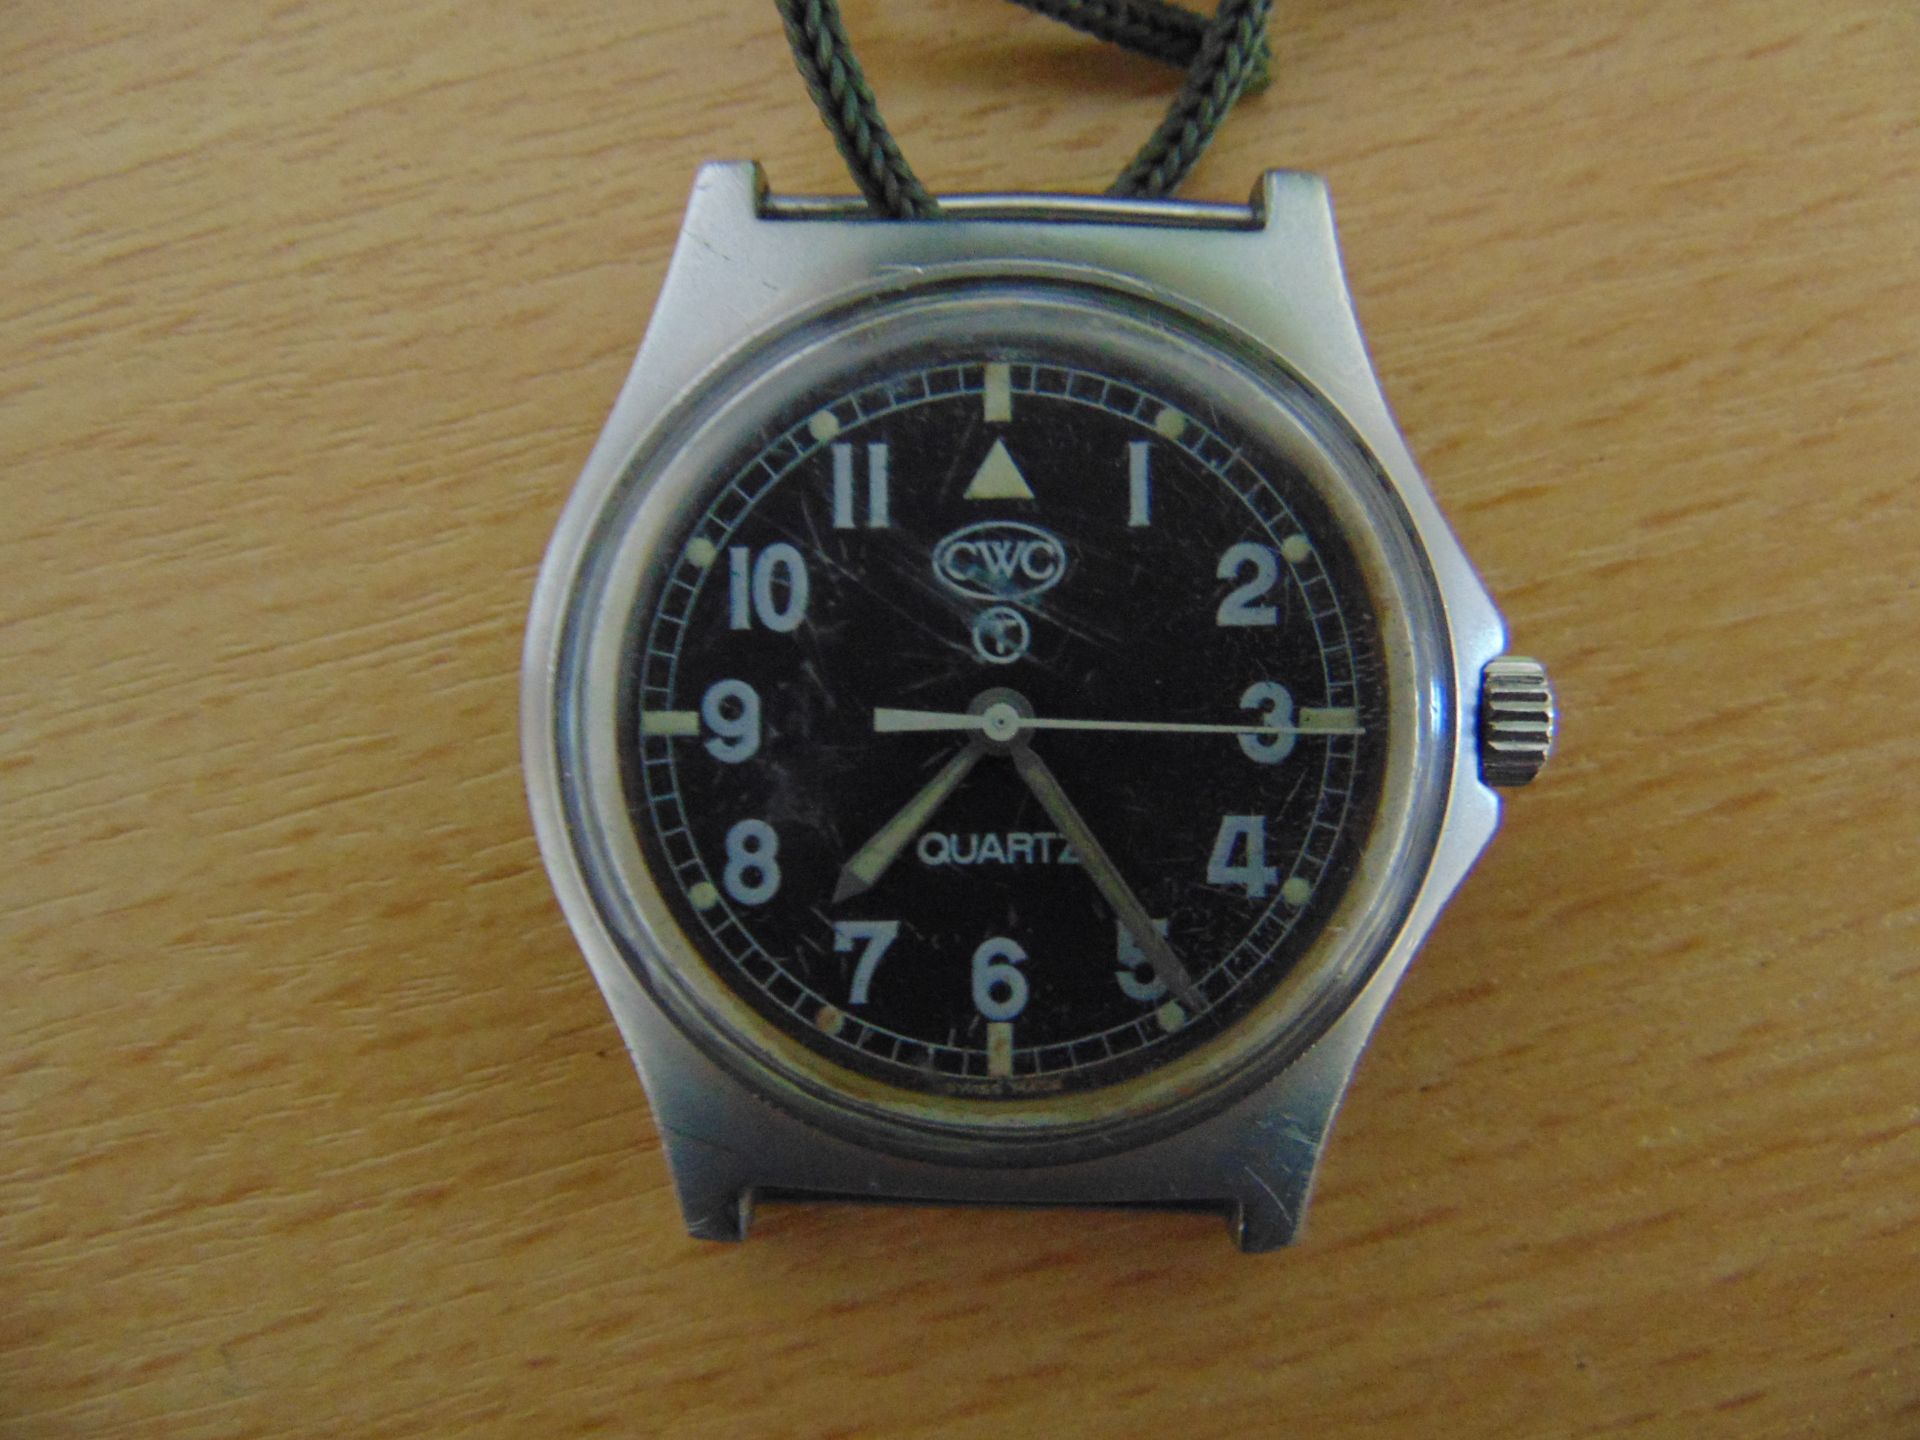 CWC 0552 ROYAL MARINES ISSUE SERVICE WATCH NATO NUMBERS DATE 1989 - Image 2 of 9